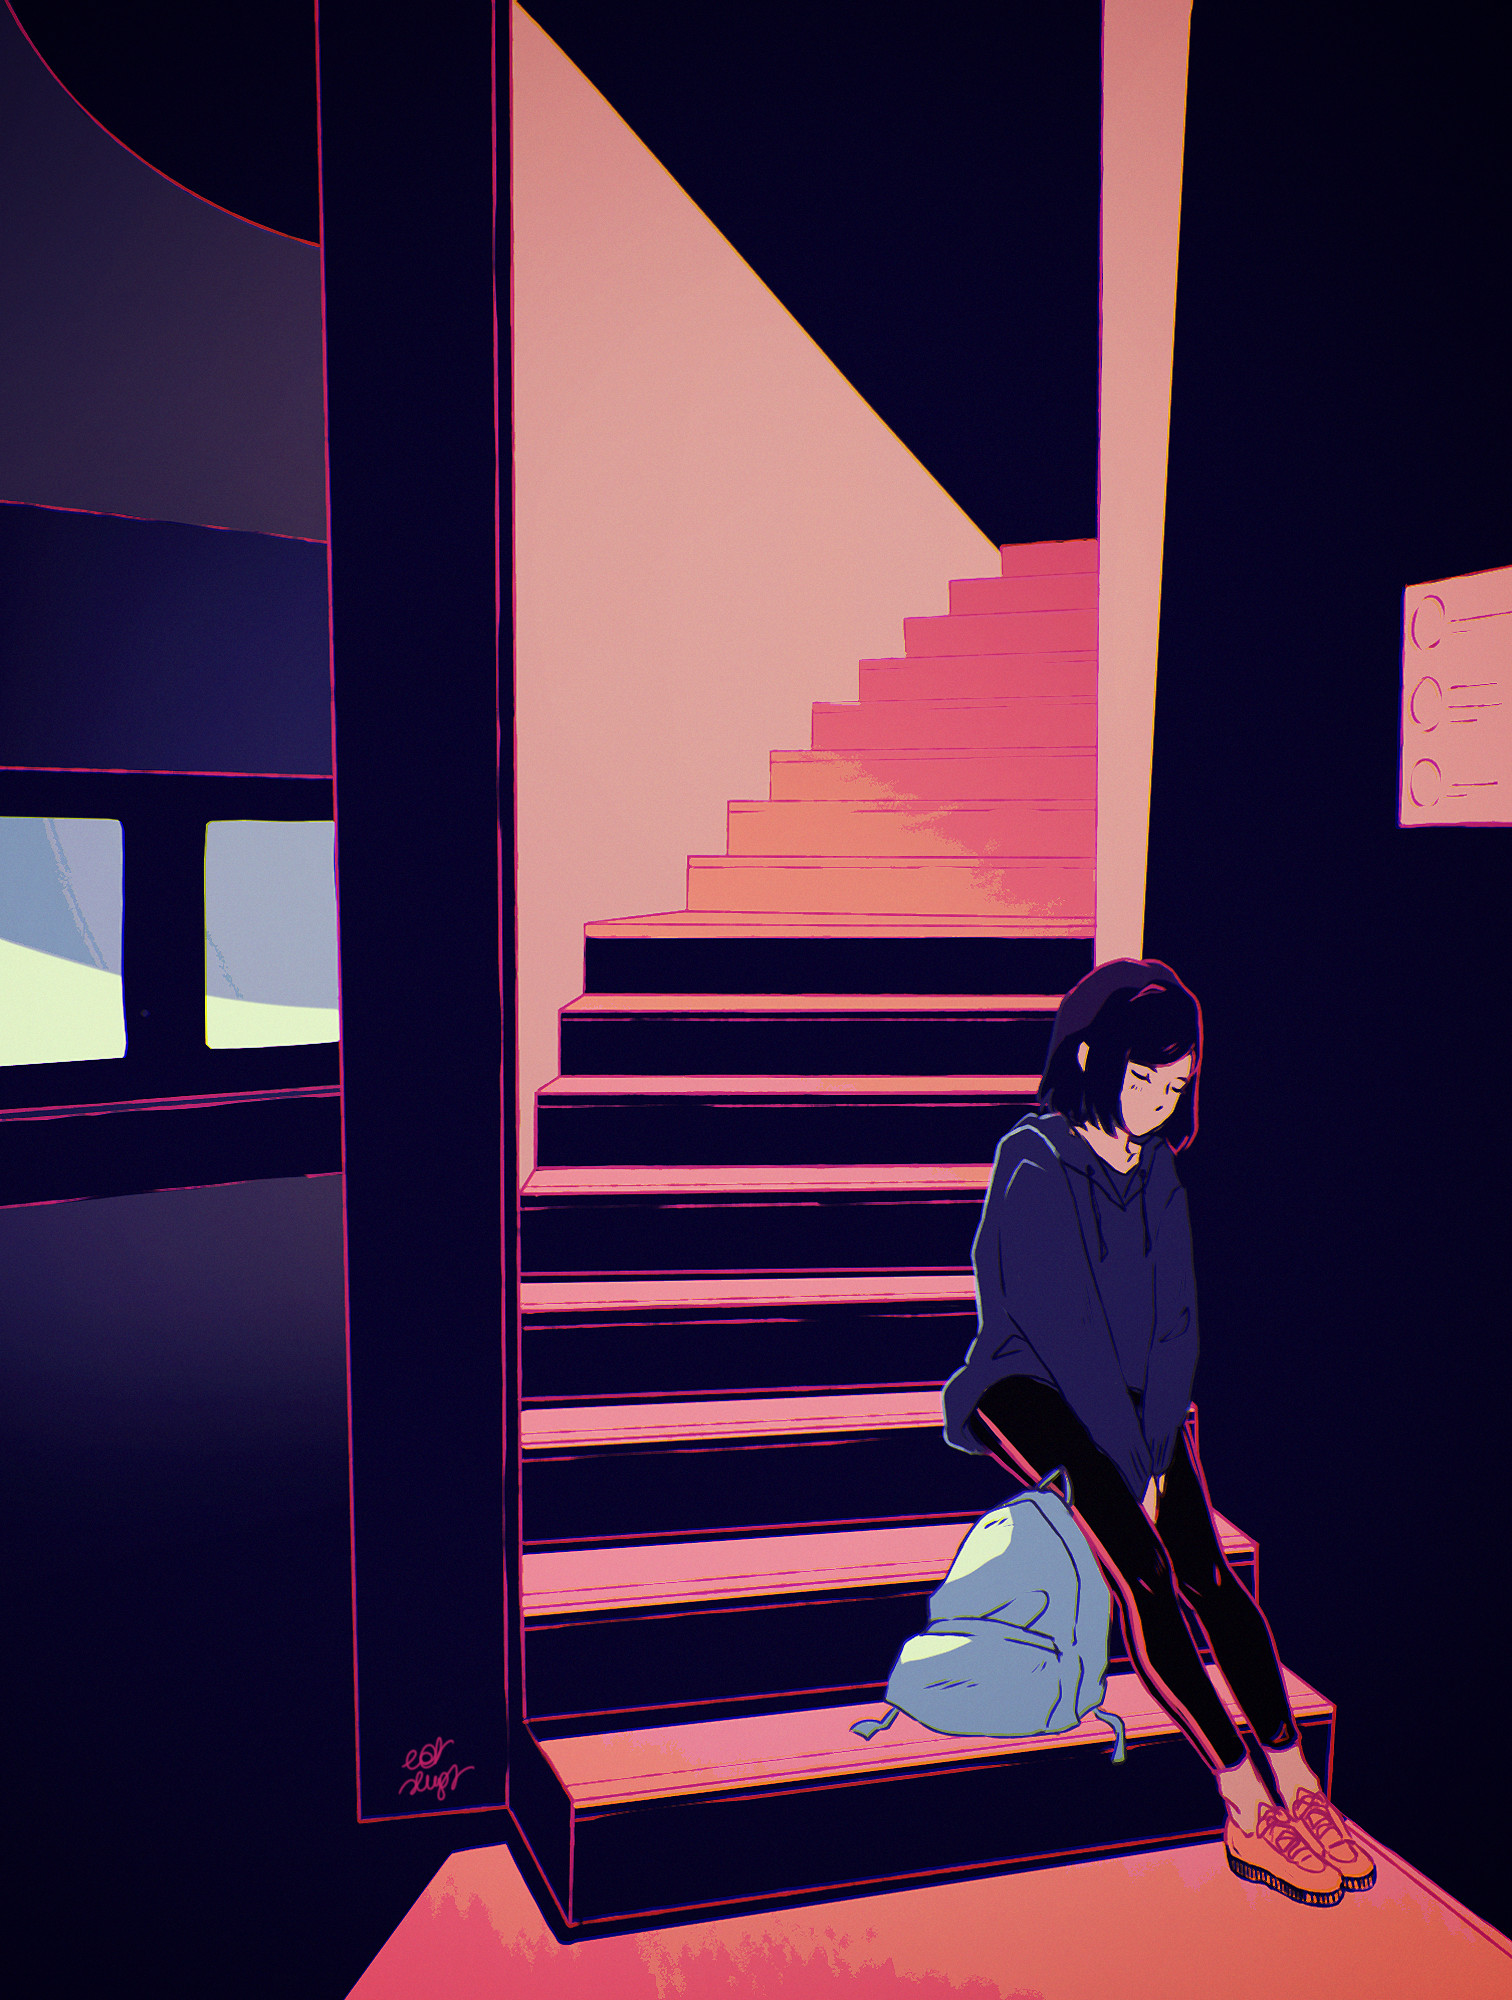 Windows Backgrounds sadness, art, vector, girl, stairs, ladder, loneliness, sorrow